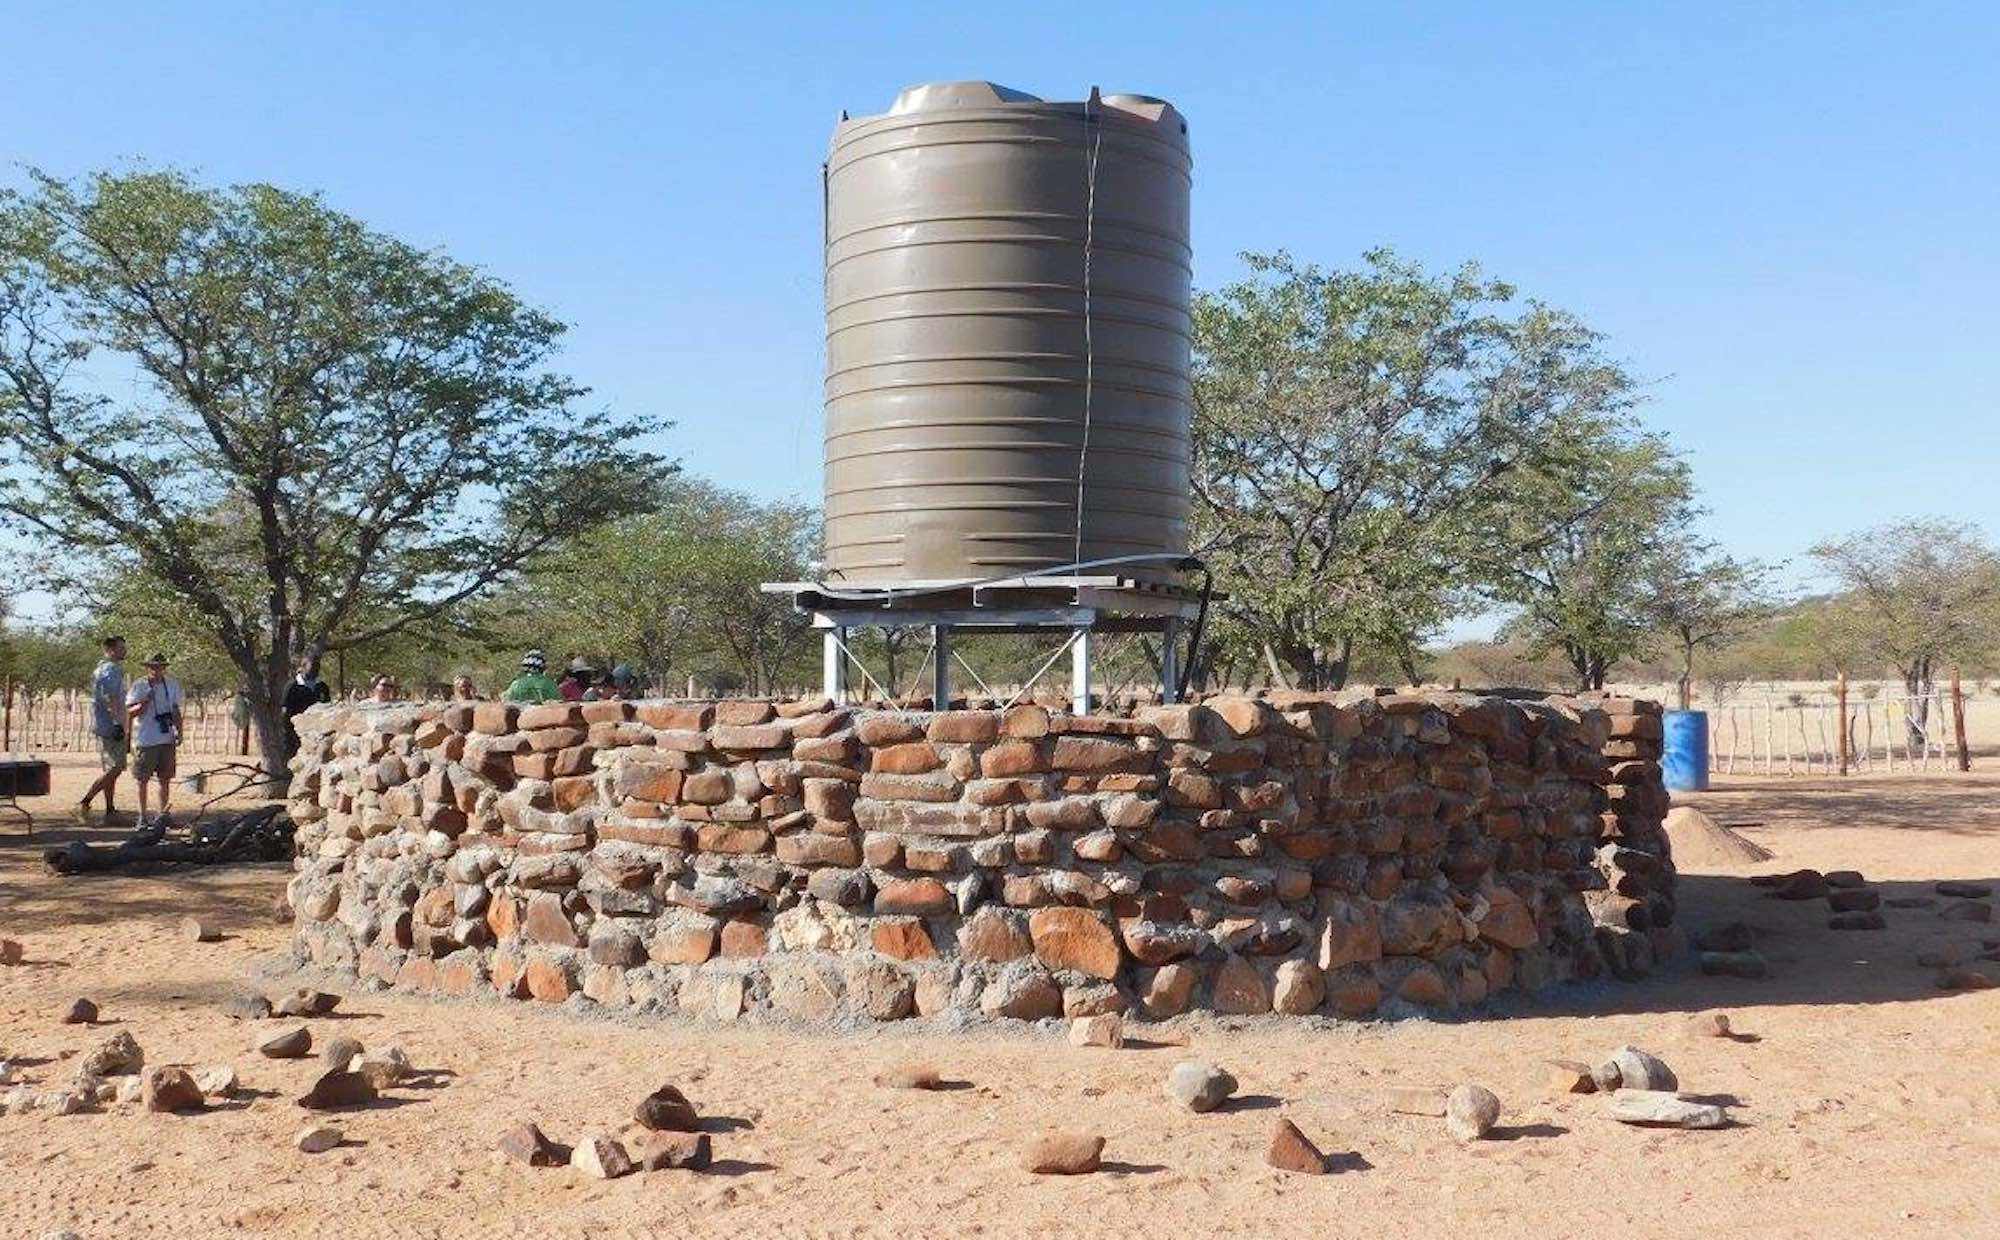 A water tank surrounded by a thick stone wall cemented together.